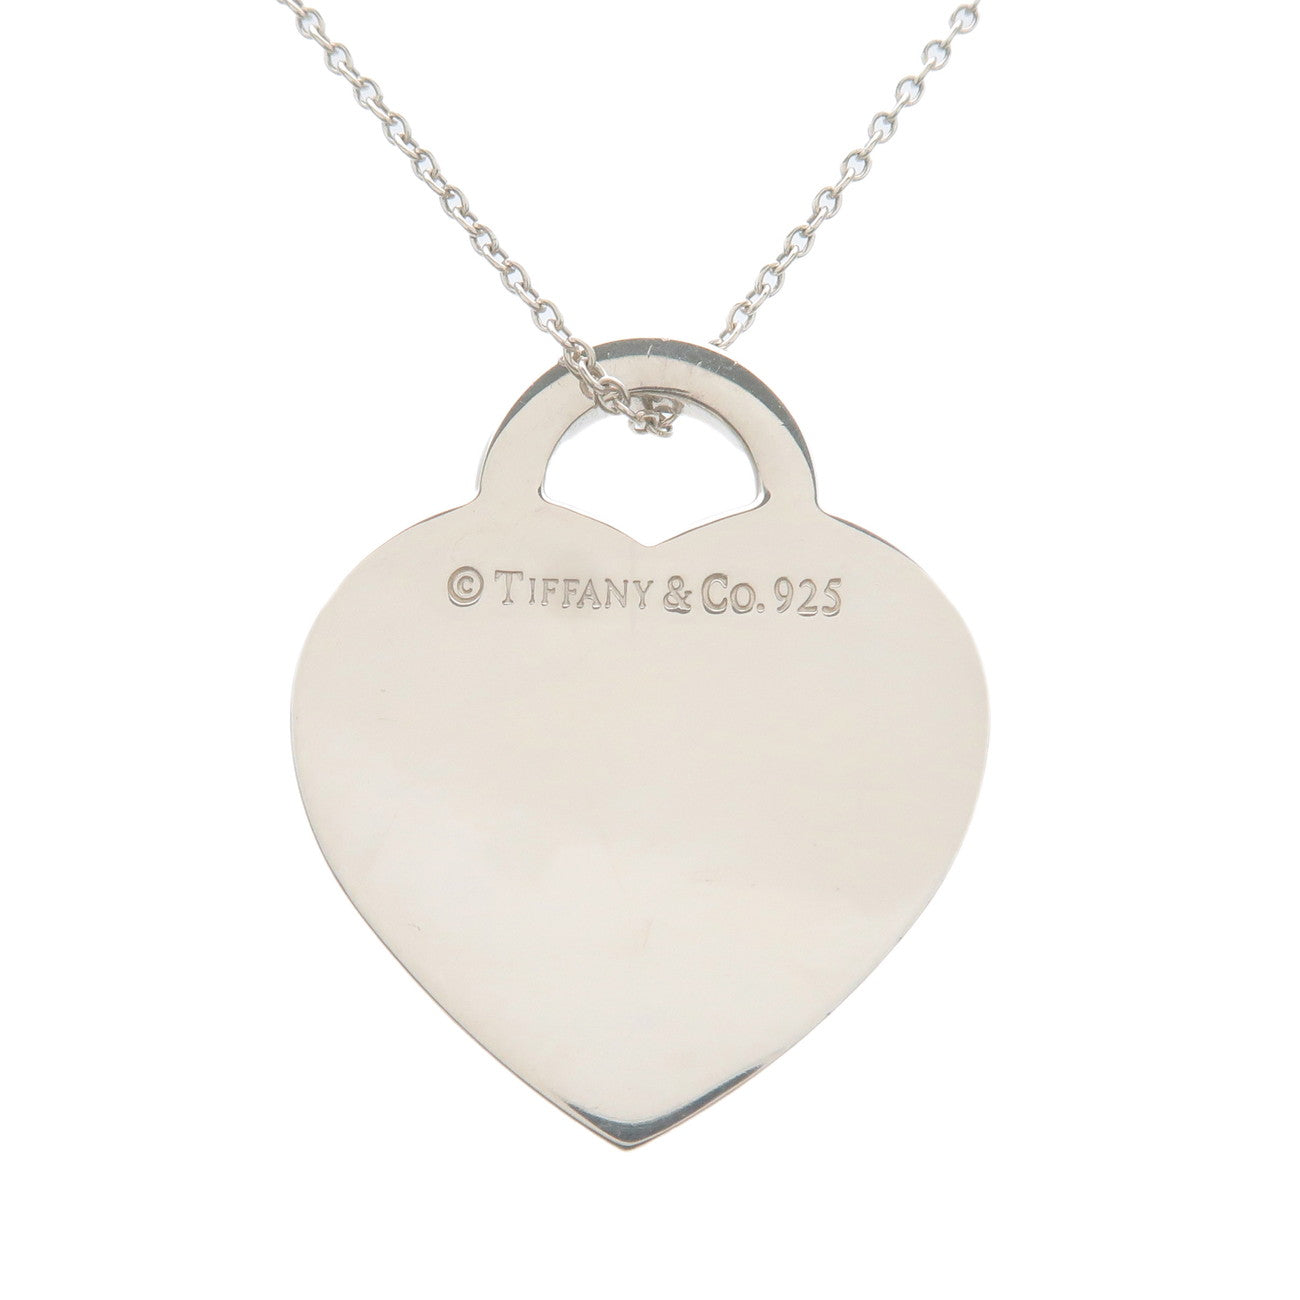 Tiffany&Co. Notes Heart Tag Necklace SV925 Silver